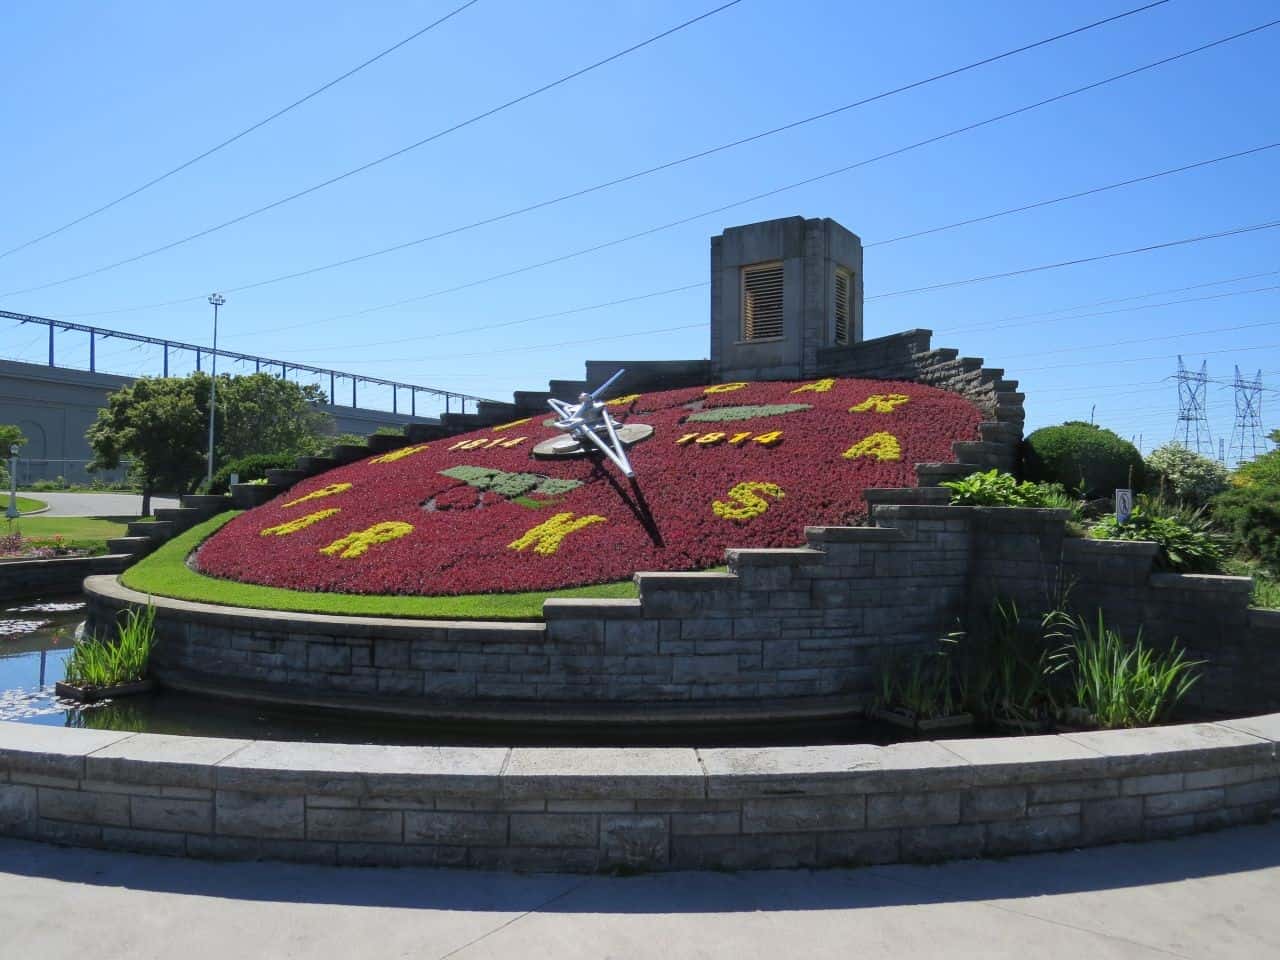 The Niagara River Recreational Trail allows hikers and cyclists can visit popular tourist attractions in Niagara Falls like the Floral Clock in Ontario, Canada